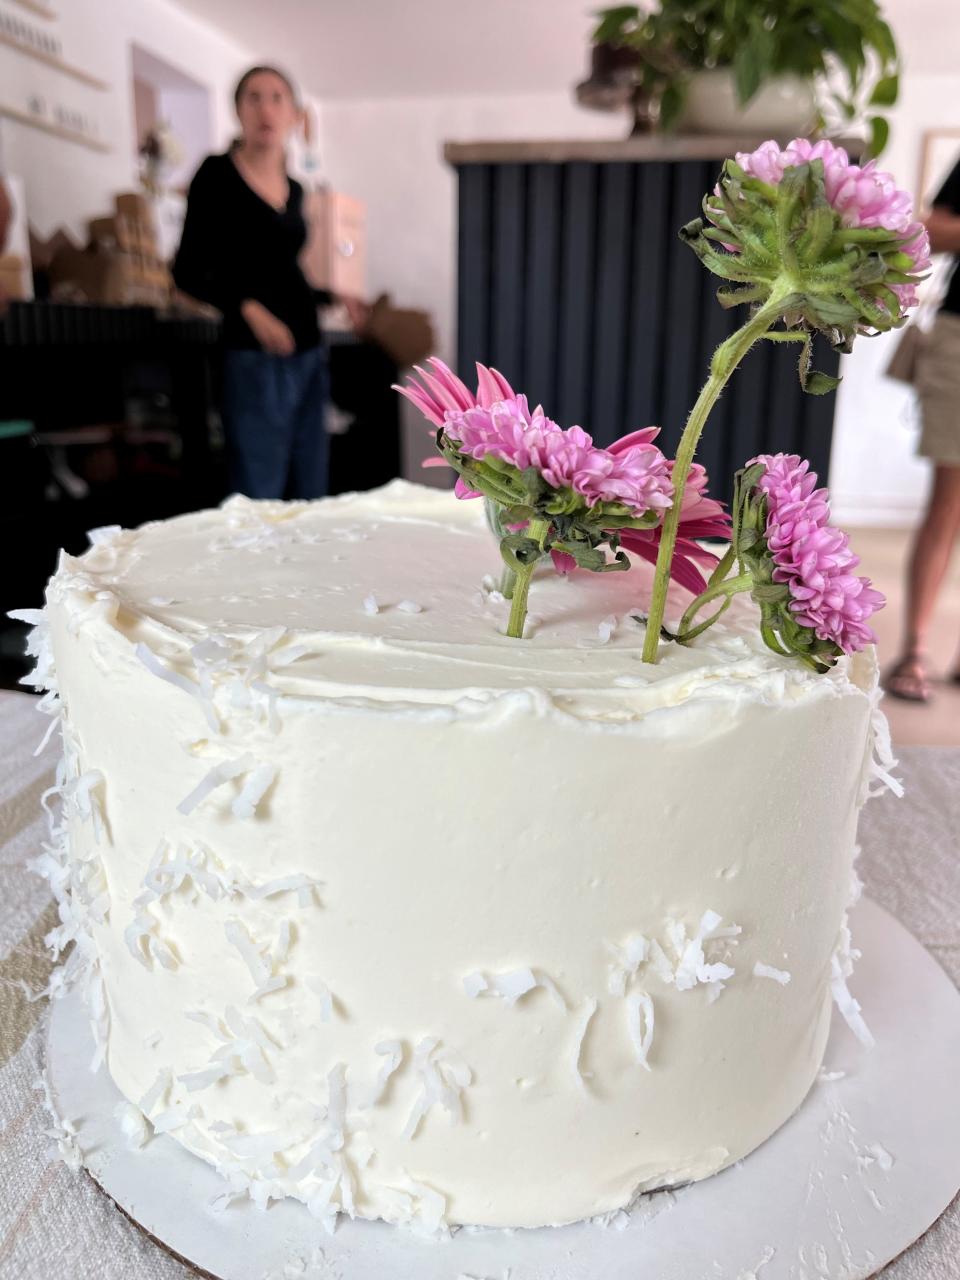 The cakes at Sweet Floret Cakery in Matlacha are works of art.